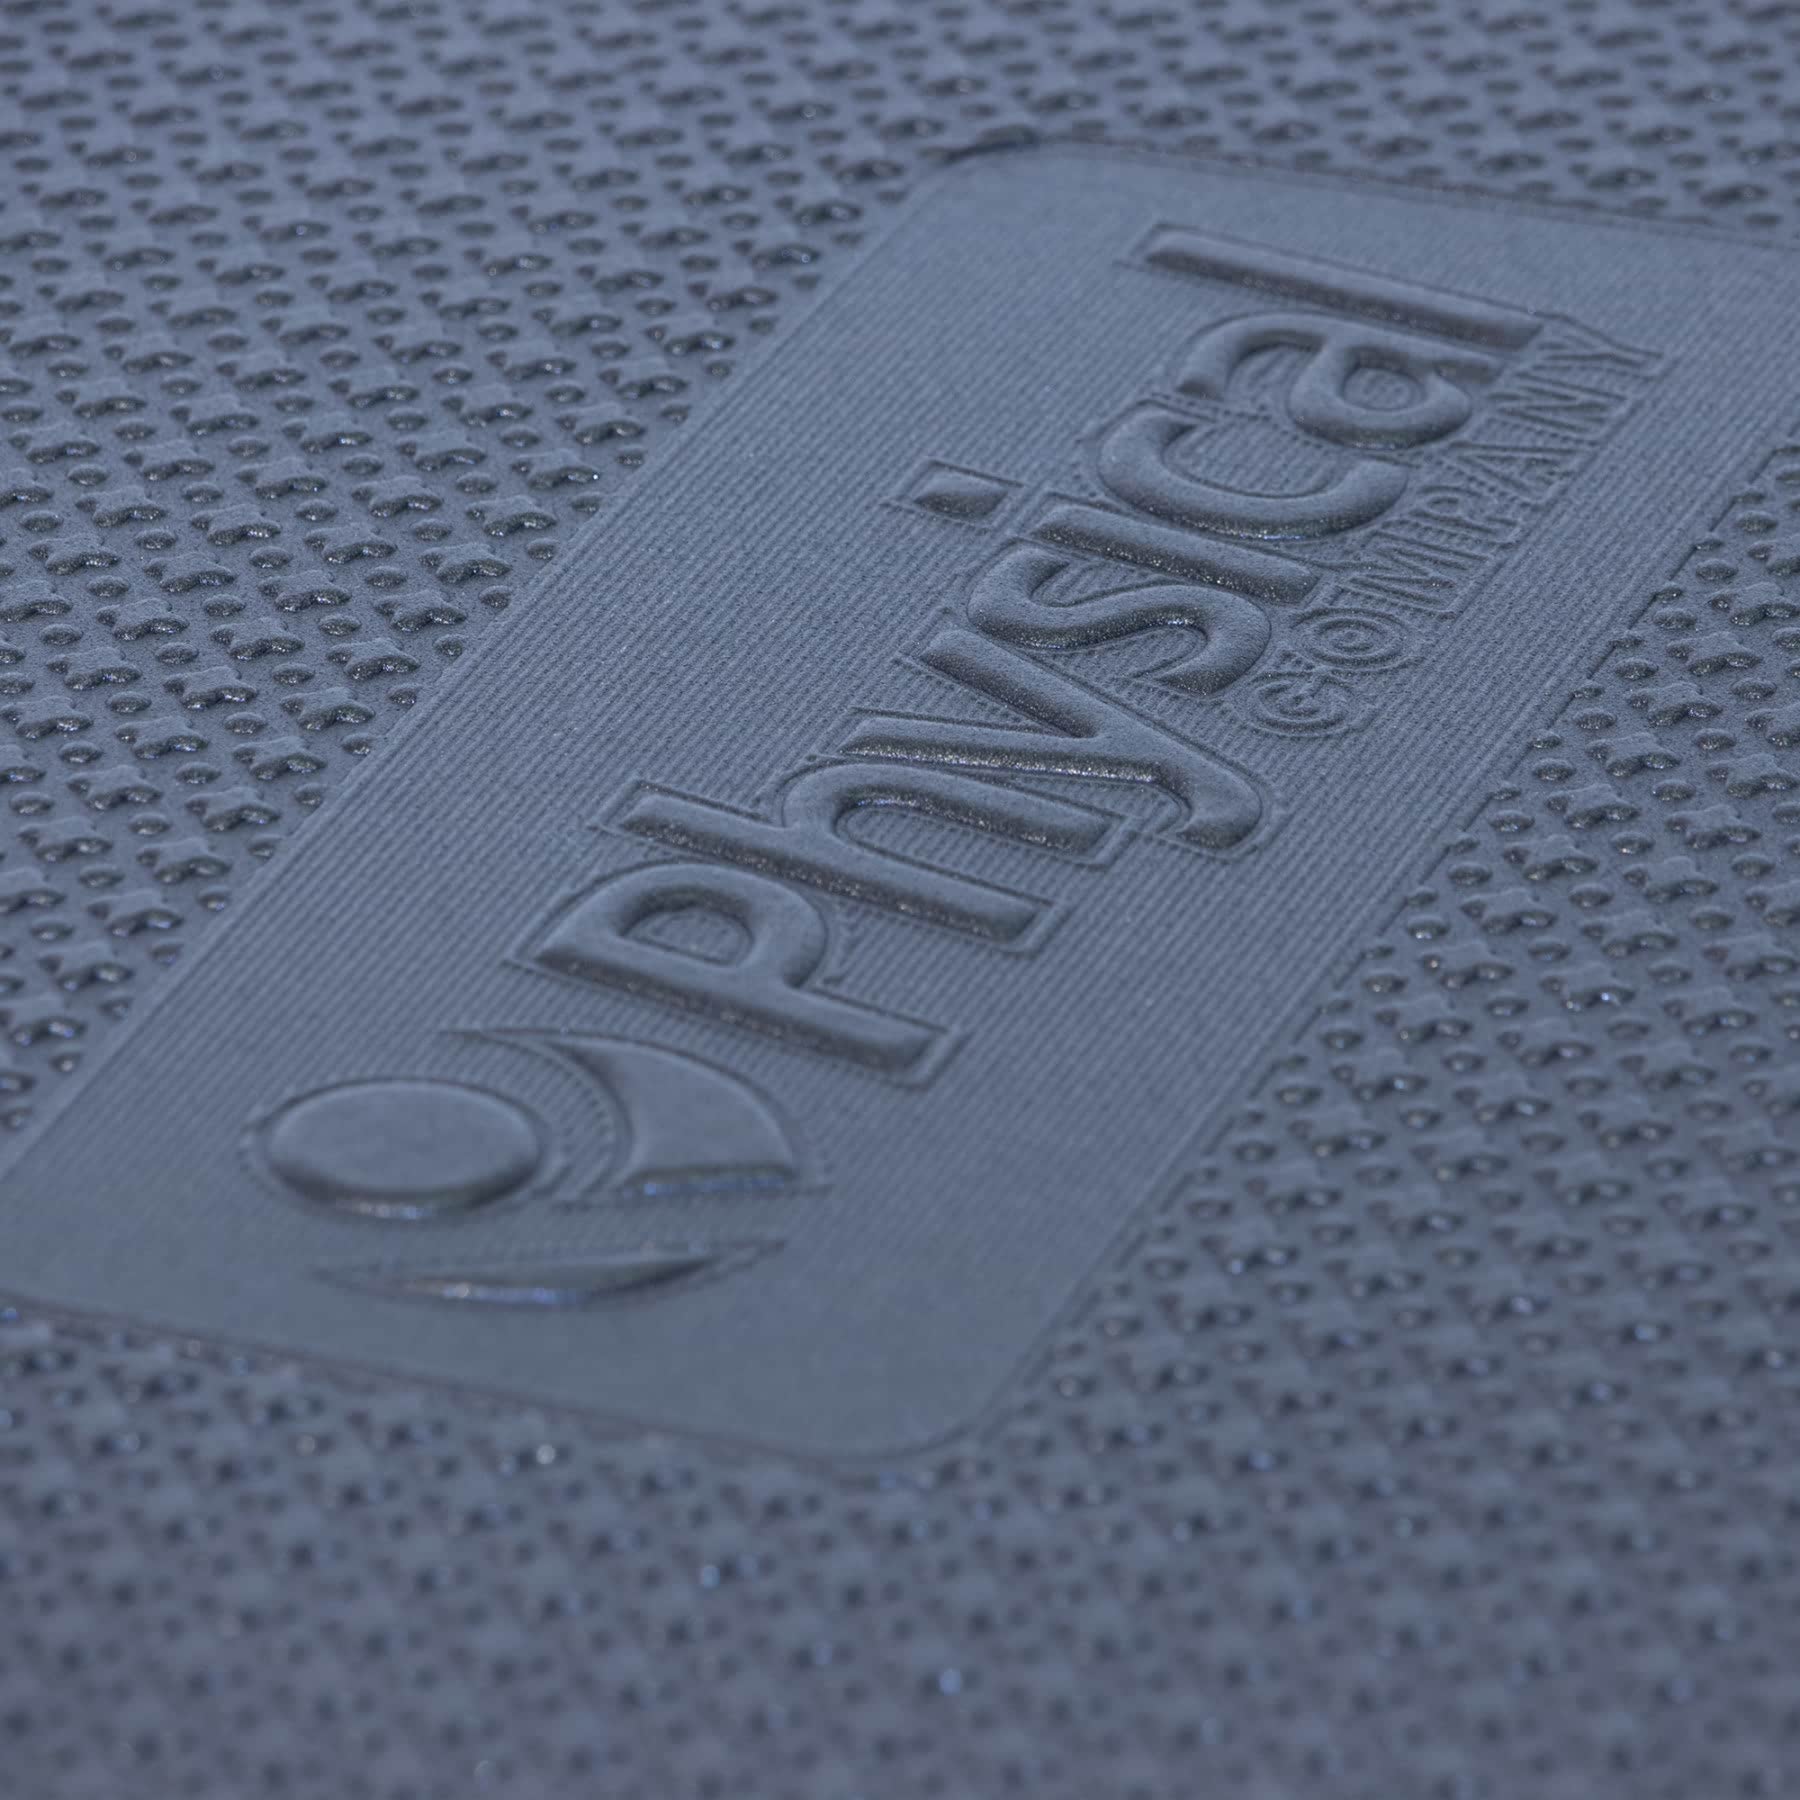 physical company embossed logo on a black fitness exercise mat